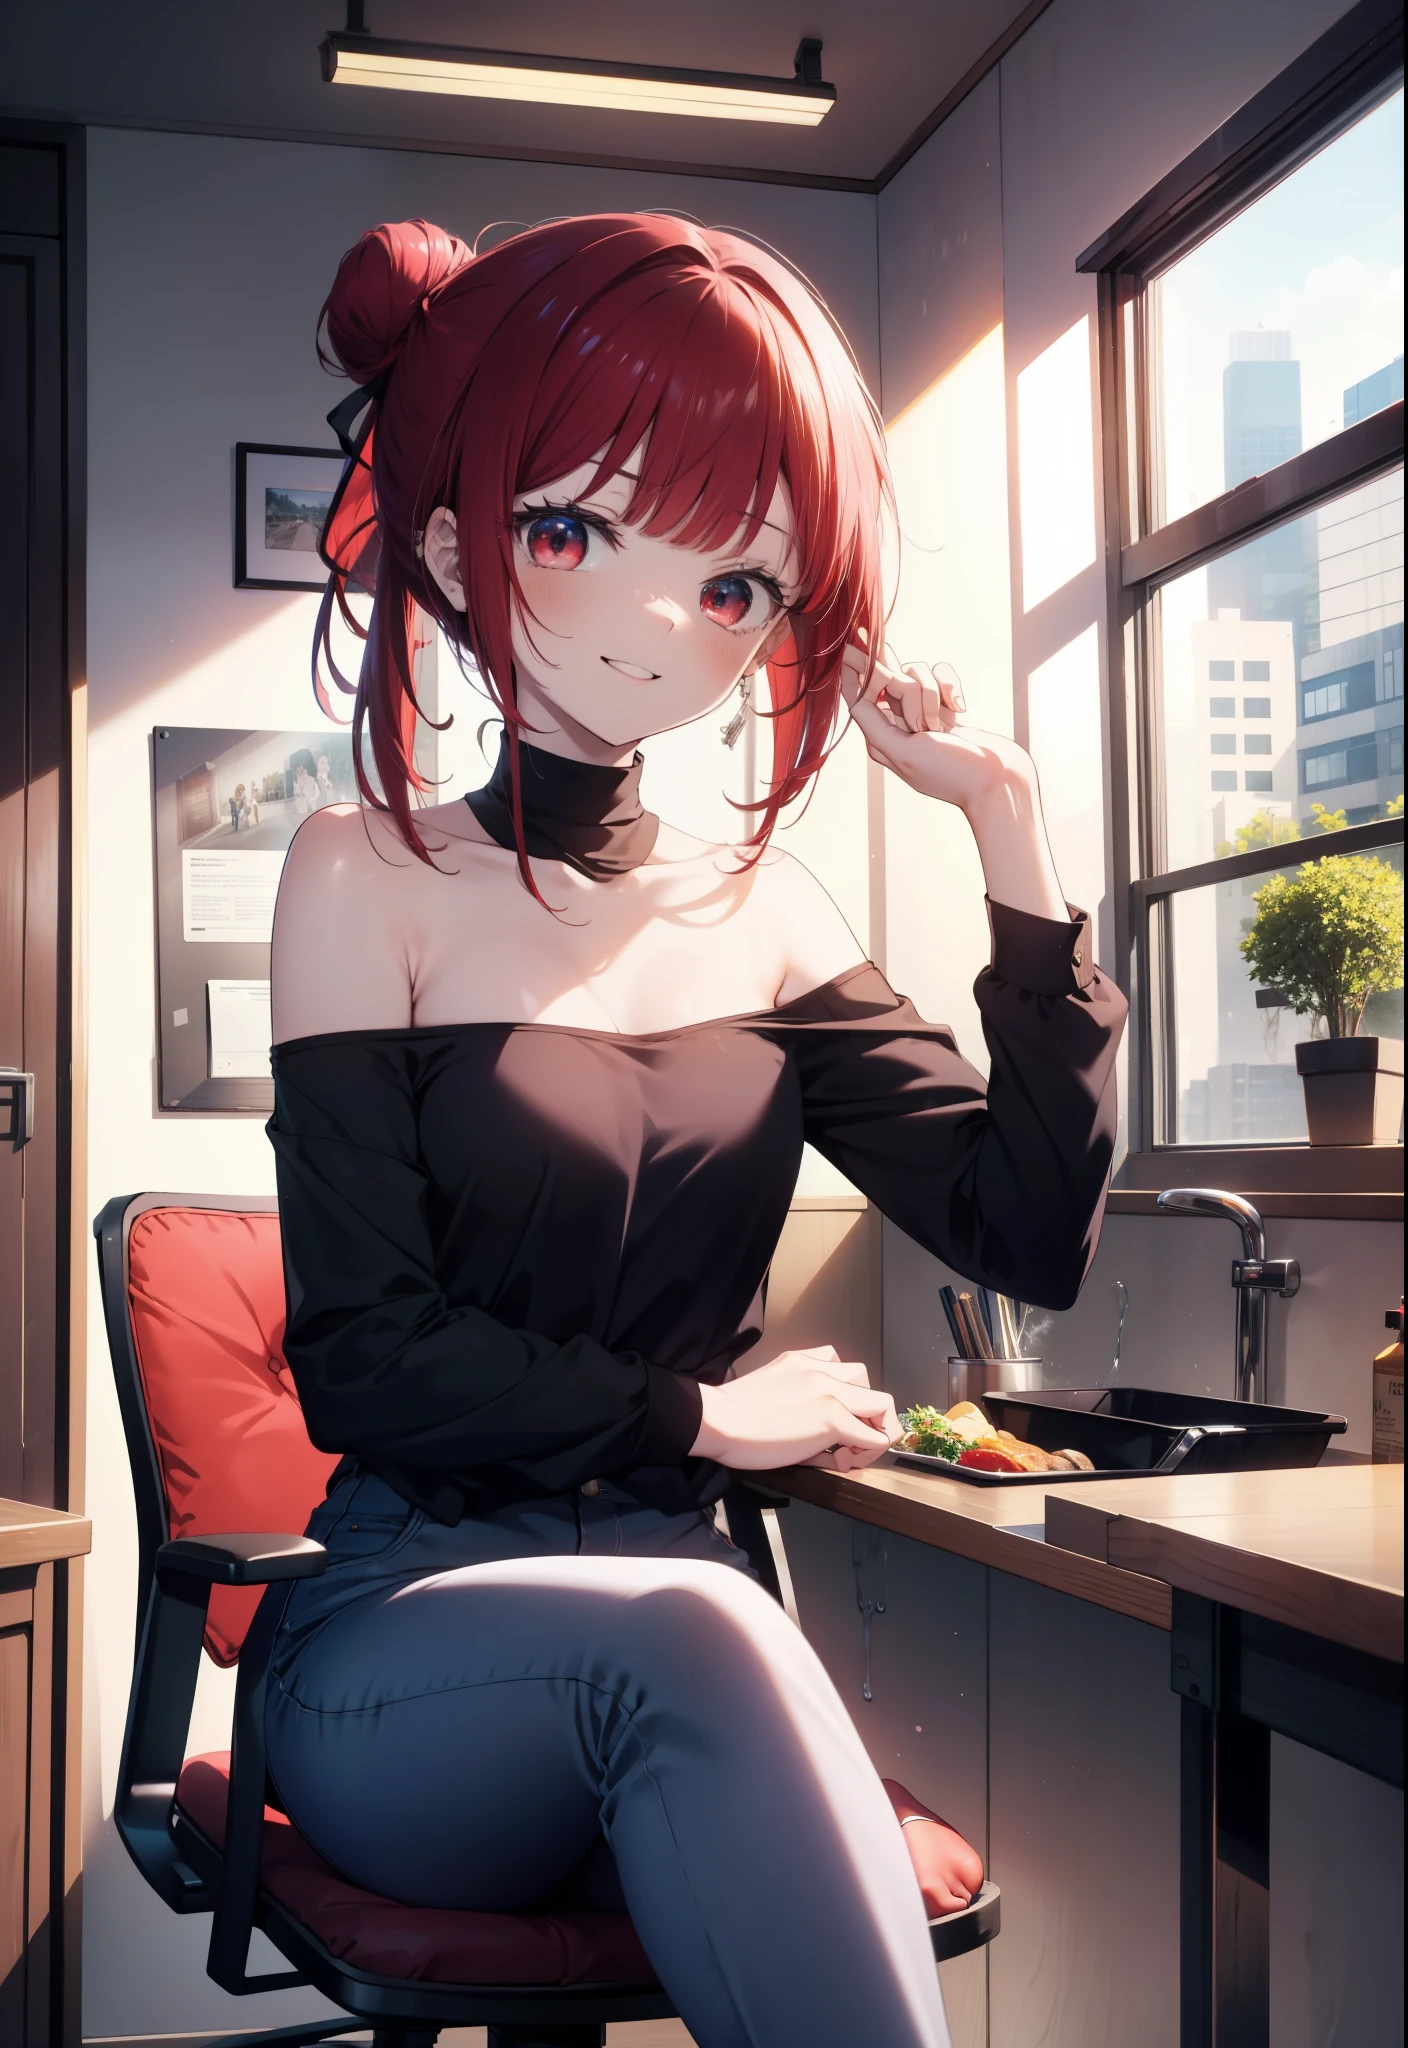 Arima etc.., Arima Kana, (Red eyes:1.5), Red Hair,Long Hair,happy smile, smile, Open your mouth,Hair Bun, single  Hair Bun,Redhead,Off-the-shoulder shirt,Exposing shoulders,skinny pants,Stiletto heels,sitting cross-legged on a chair,There is a lunch box on the table,whole bodyがイラストに入るように,Daytime,Clear skies,
壊す looking at viewer,whole body,
Breaking indoors,office,　　　　　　　　　　　　(masterpiece:1.2), highest quality, High resolution, unity 8k wallpaper, (shape:0.8), (Beautiful and beautiful eyes:1.6), Highly detailed face, Perfect lighting, Extremely detailed CG, (Perfect hands, Perfect Anatomy),